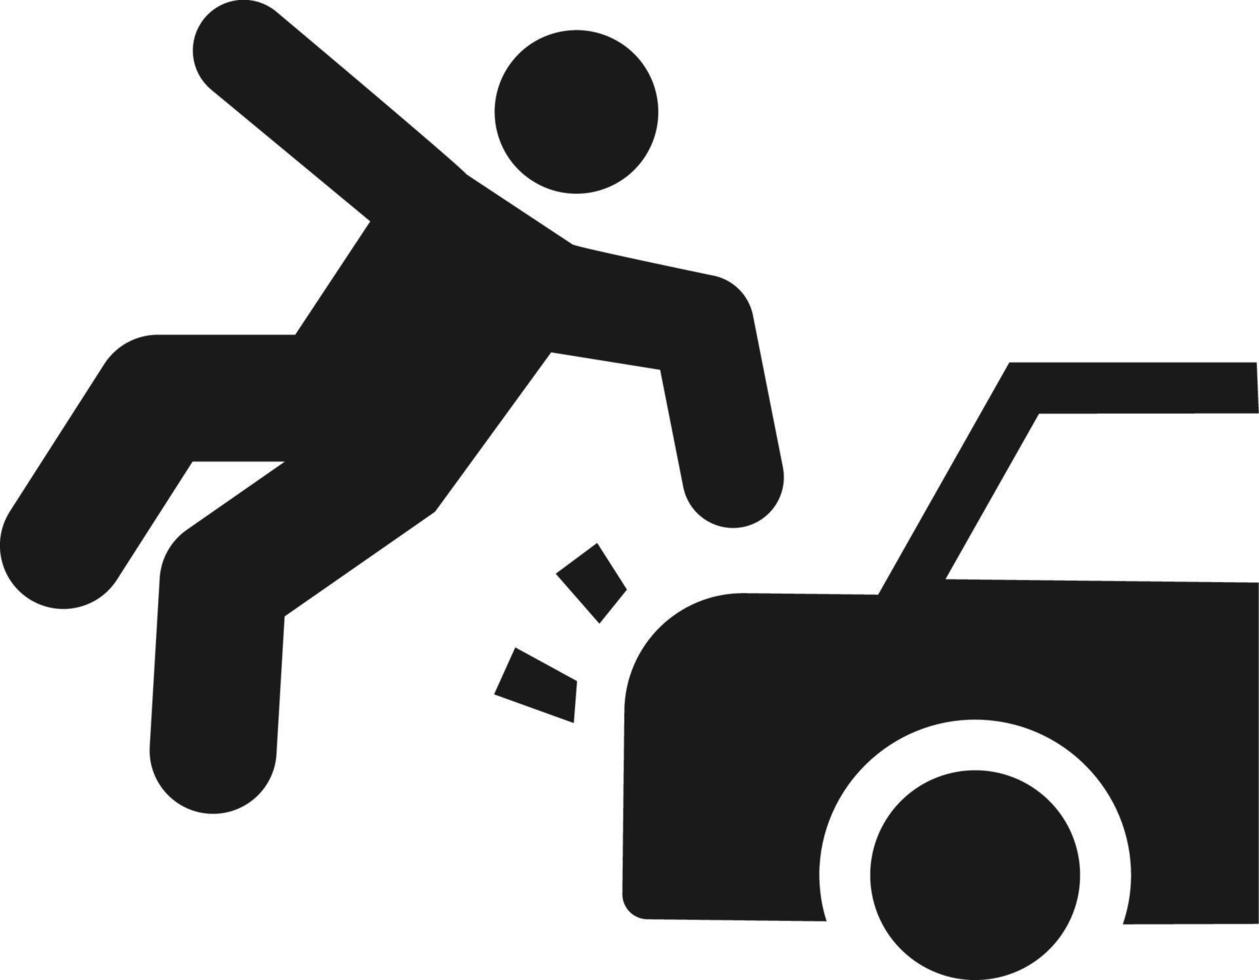 Accident, car, injure, liability icon - Vector. Insurance concept vector illustration. on white background